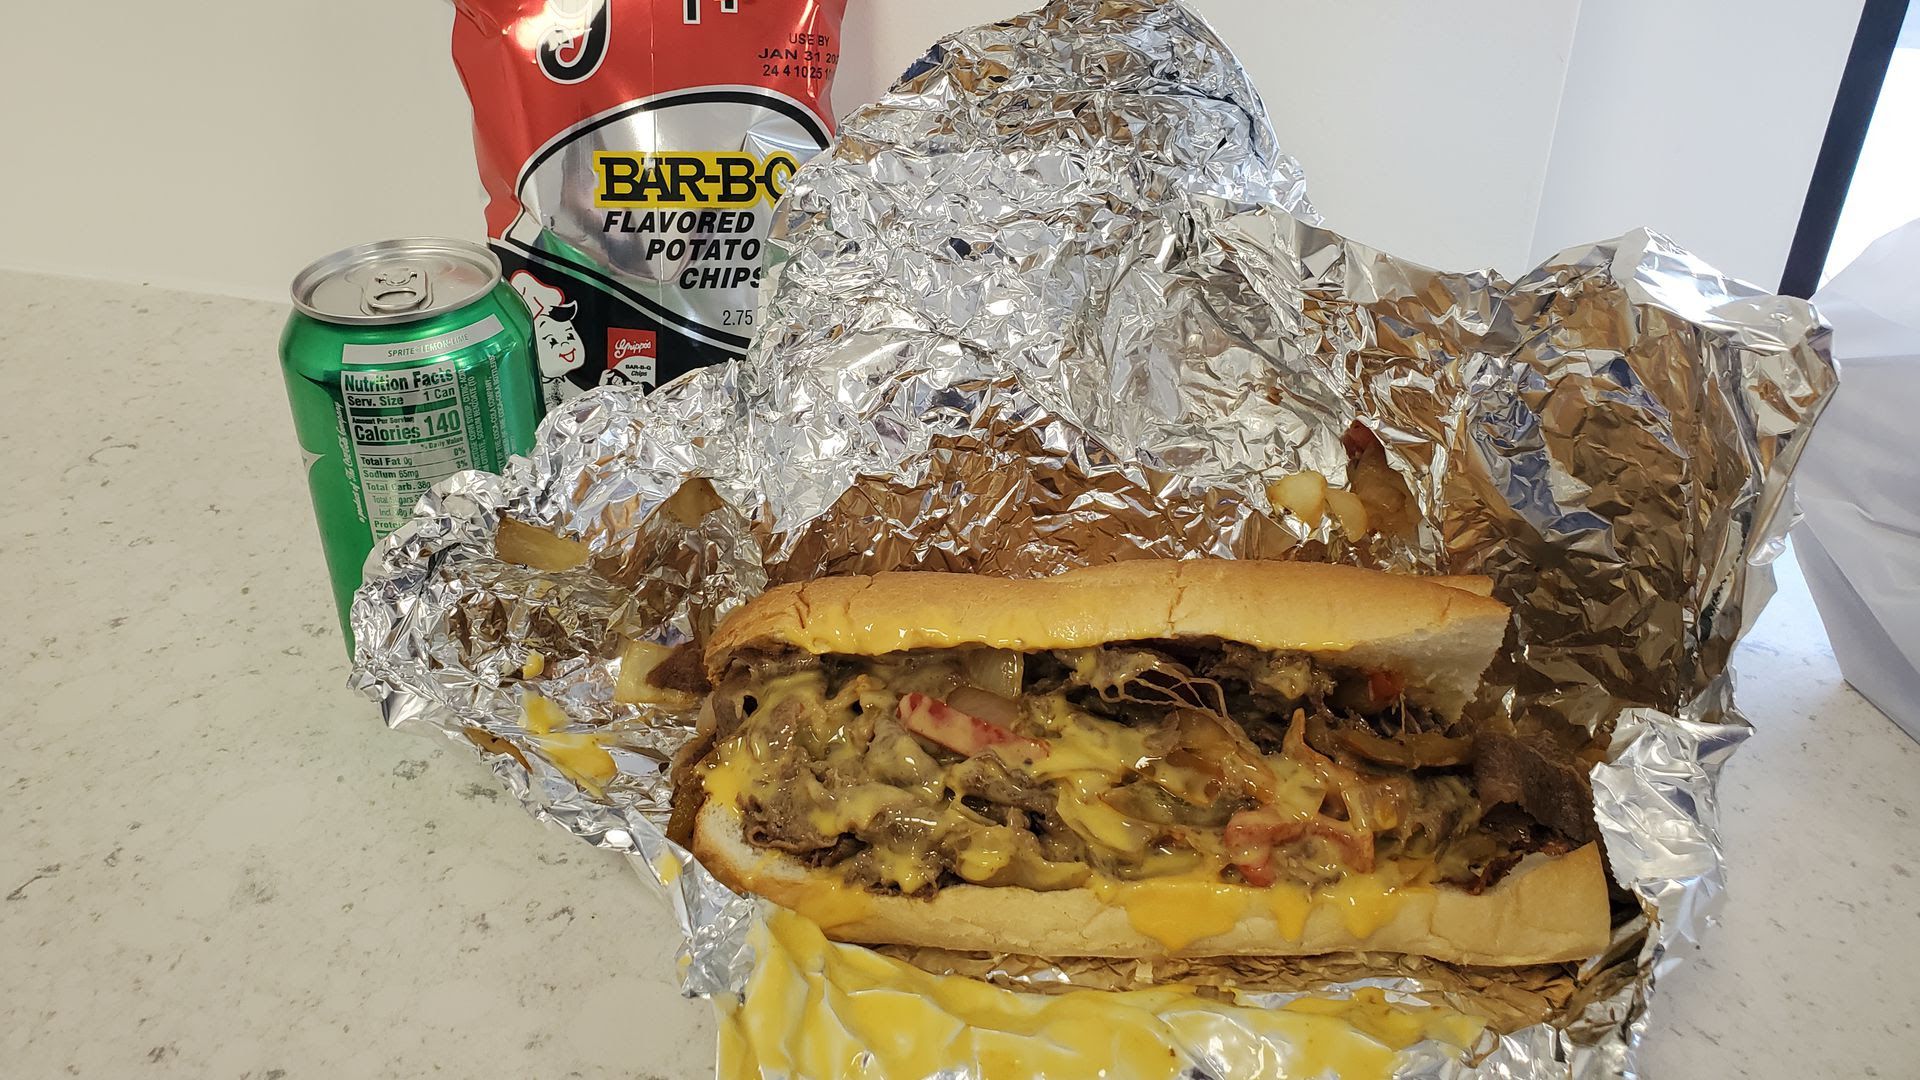 A cheesesteak wrapped in foil covered in cheese sauce, with a bag of potato chips and a can of soda next to it